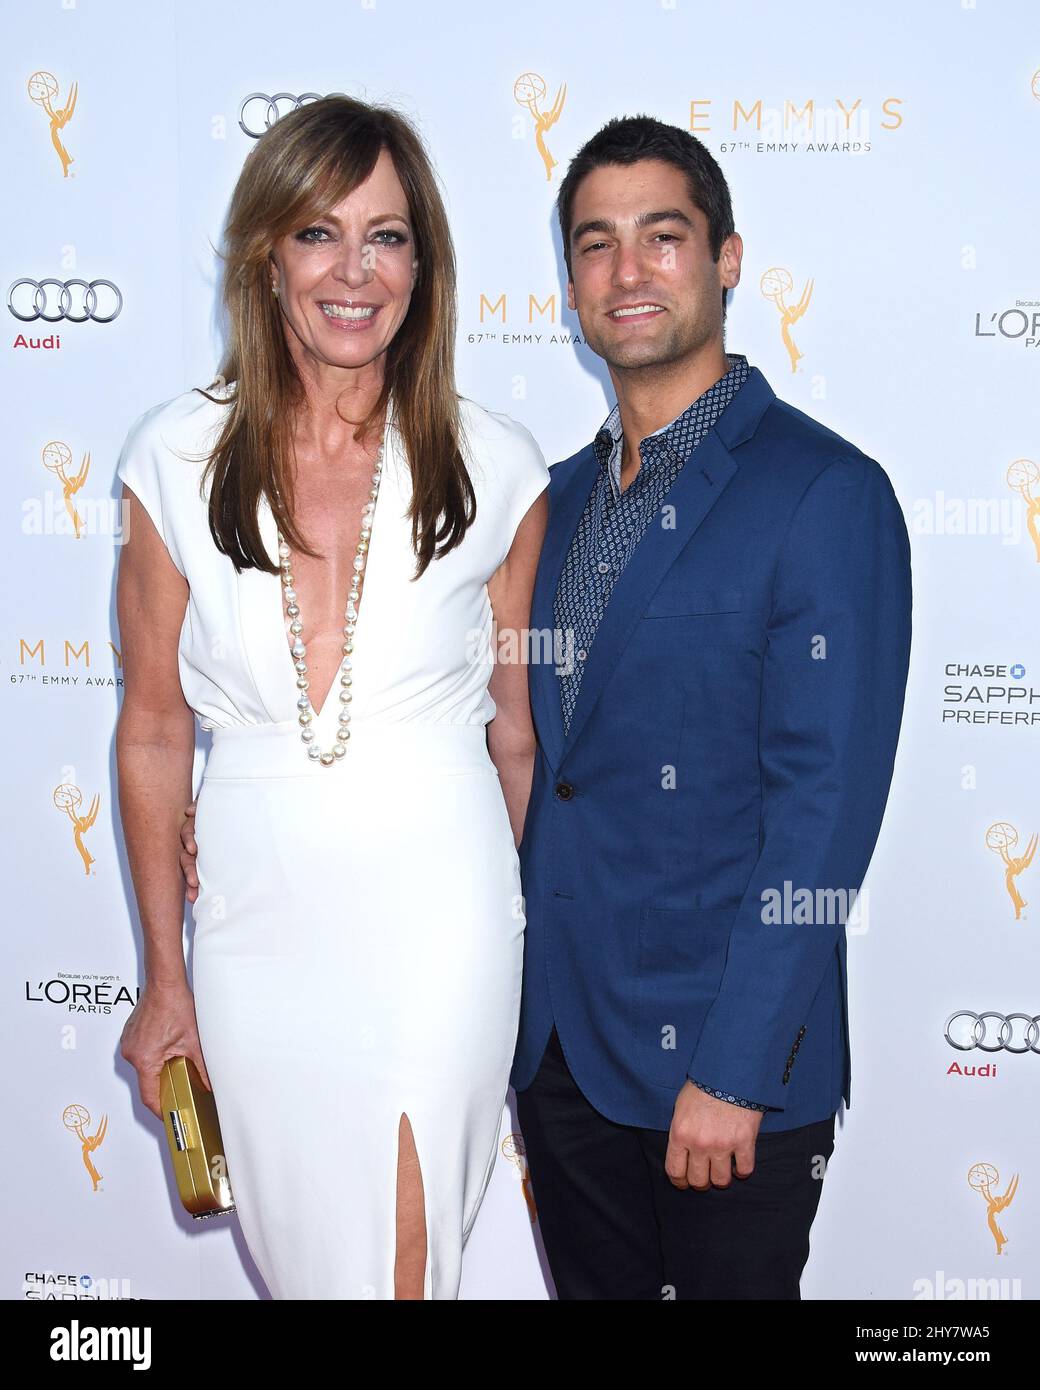 Allison Janney and Philip Joncas arriving at the Television Academy's 67th Emmy Awards Performers Nominee Reception held at Spectra by Wolfgang Puck at the Pacific Design Center Stock Photo